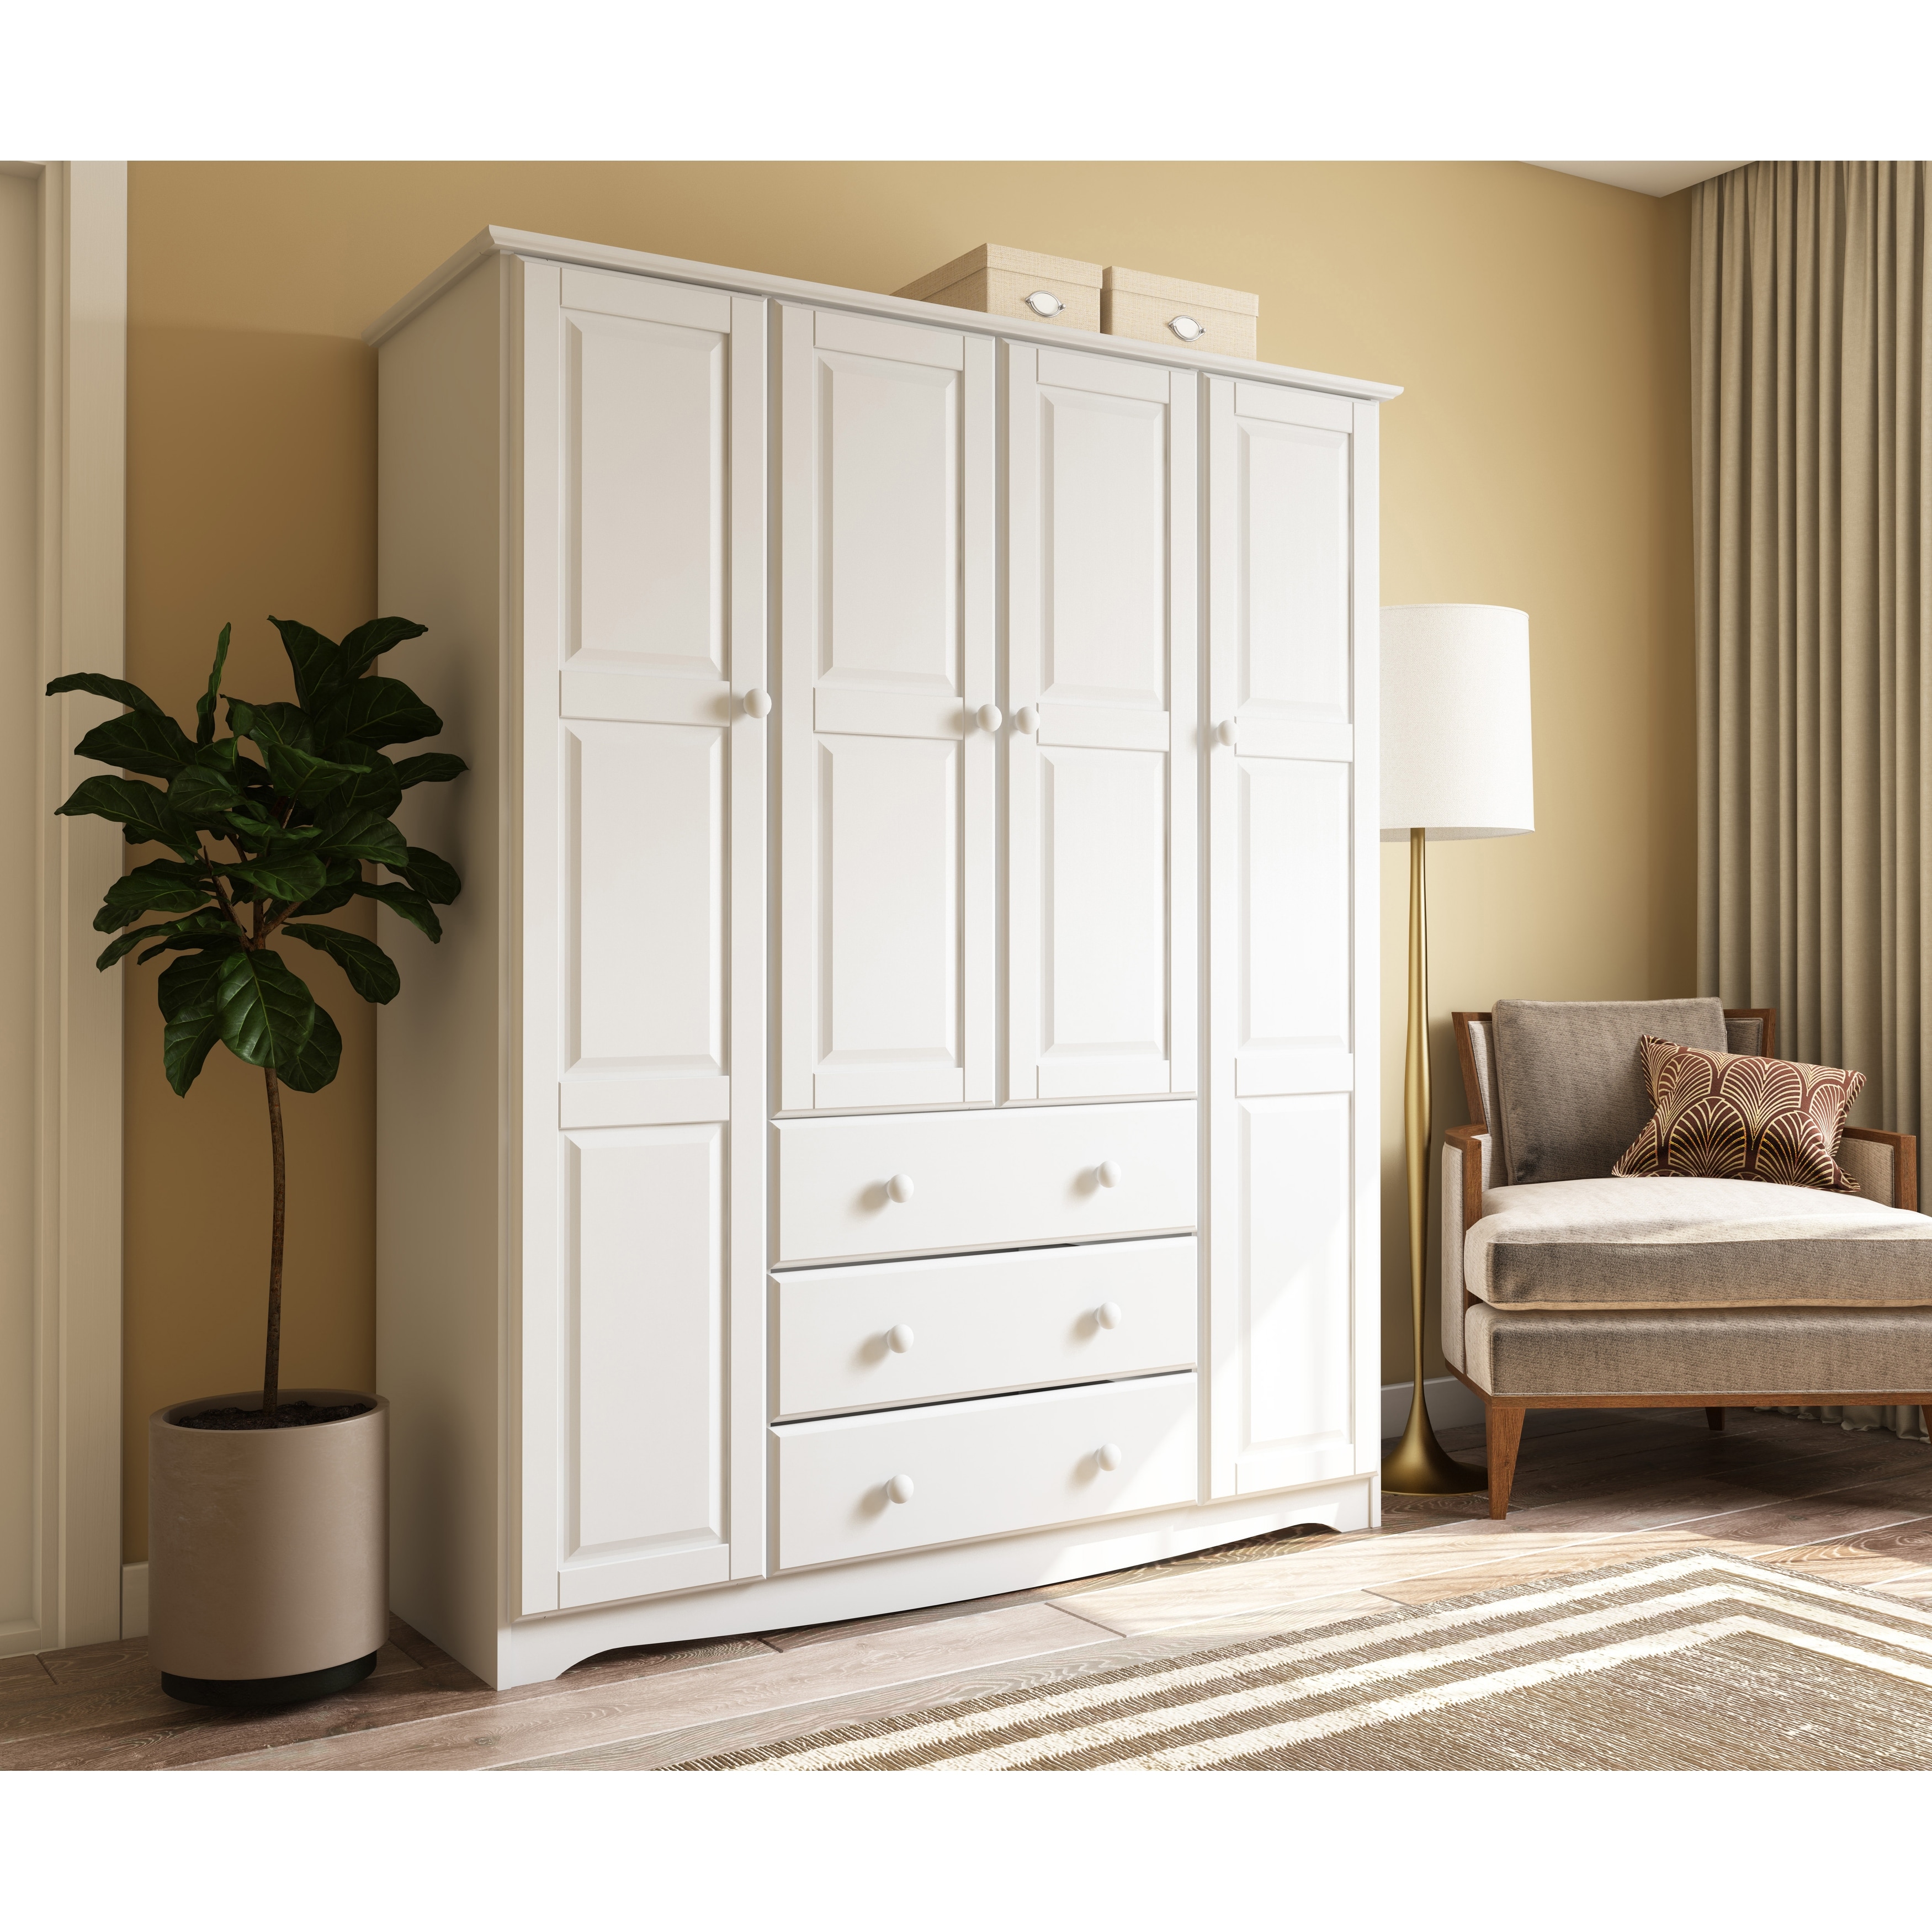 Palace Imports Family 4 Door Solid Wood Wardrobe No Shelves Included 60 25 W X 72 H X 20 75 D On Sale Overstock 19897094